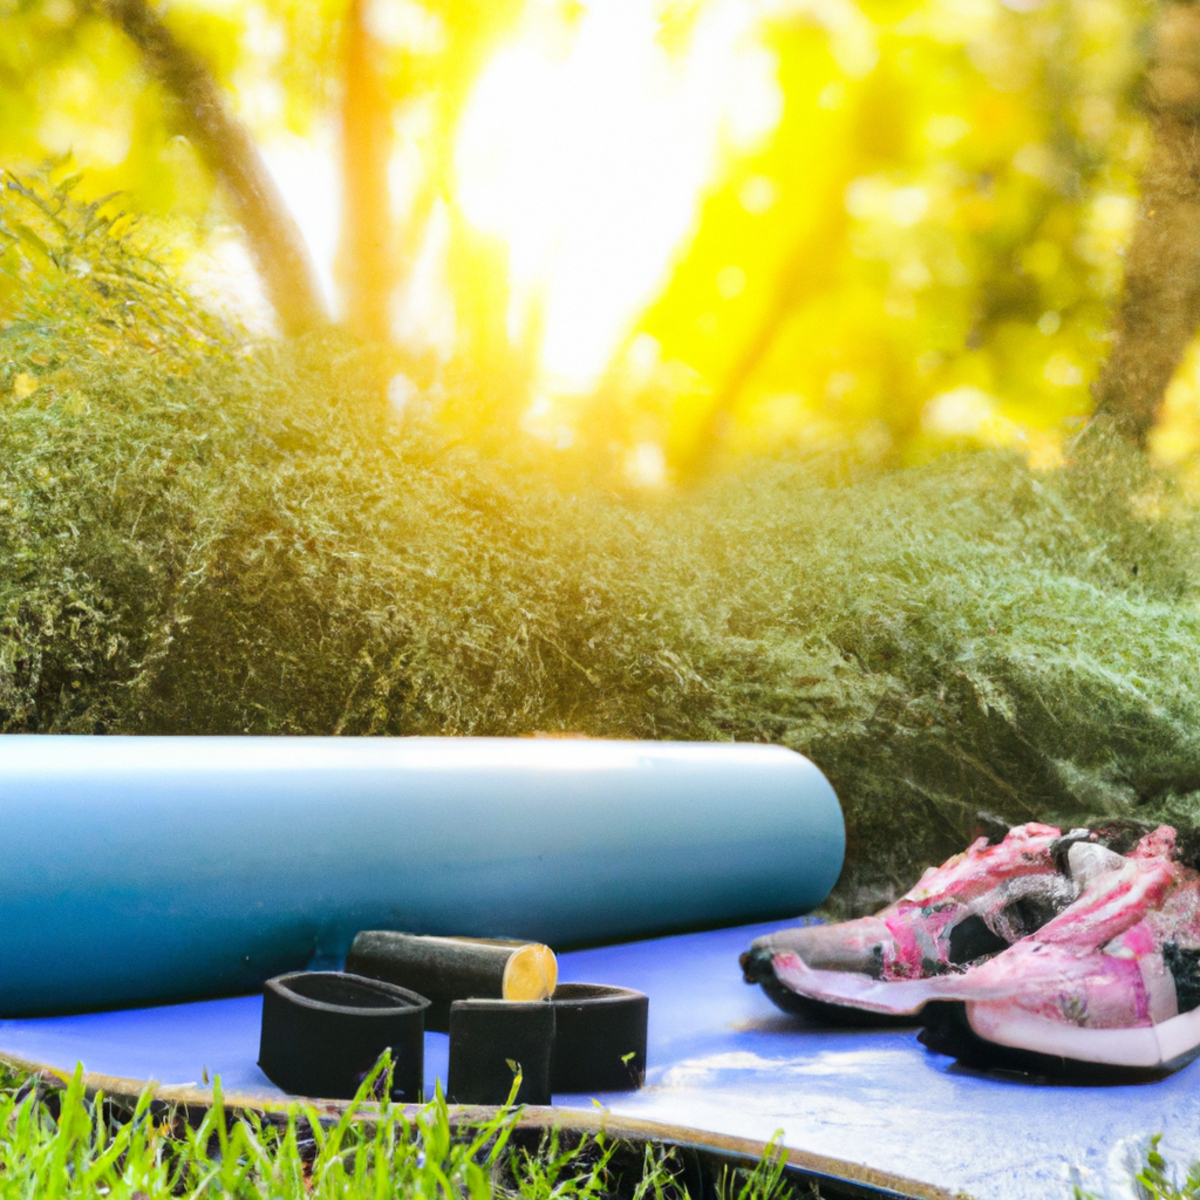 The photo captures a serene outdoor setting with a lush green backdrop. In the foreground, there are various fitness objects scattered around, including a yoga mat, resistance bands, and a foam roller. A pair of running shoes is placed next to the mat, indicating the start of a workout. The sun is shining brightly, casting a warm glow over the scene. The photo perfectly encapsulates the essence of outdoor fitness, encouraging runners to take their training outside and enjoy the natural surroundings.